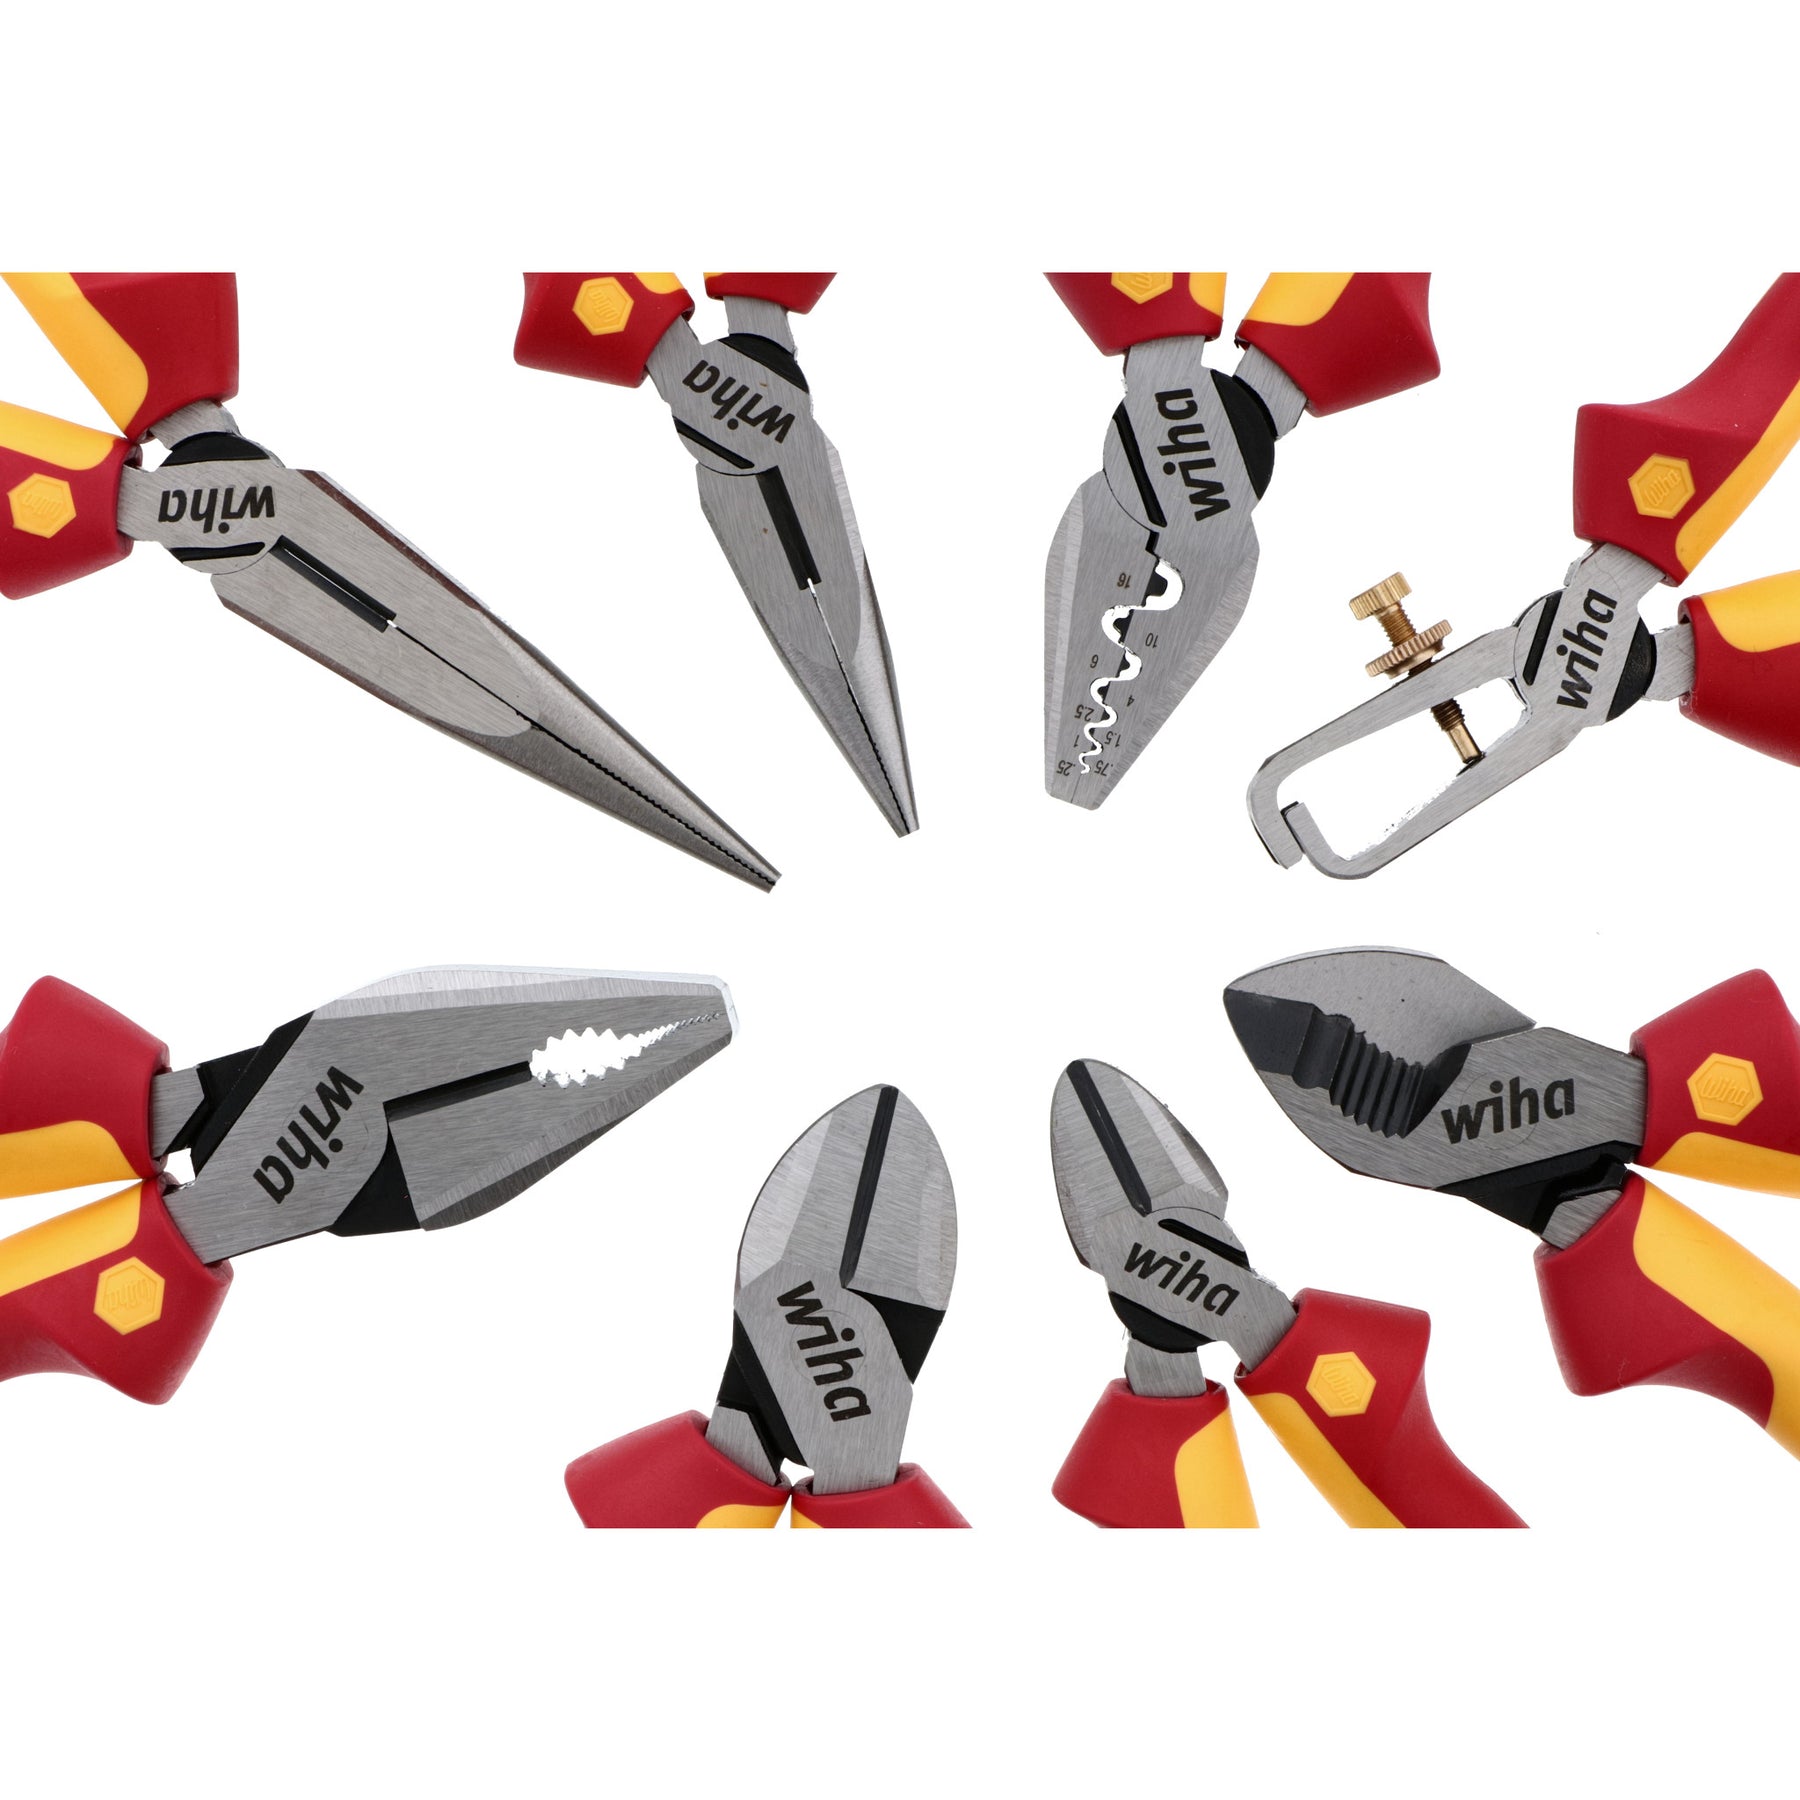 Wiha 32987 Insulated Industrial Pliers/Cutters Set